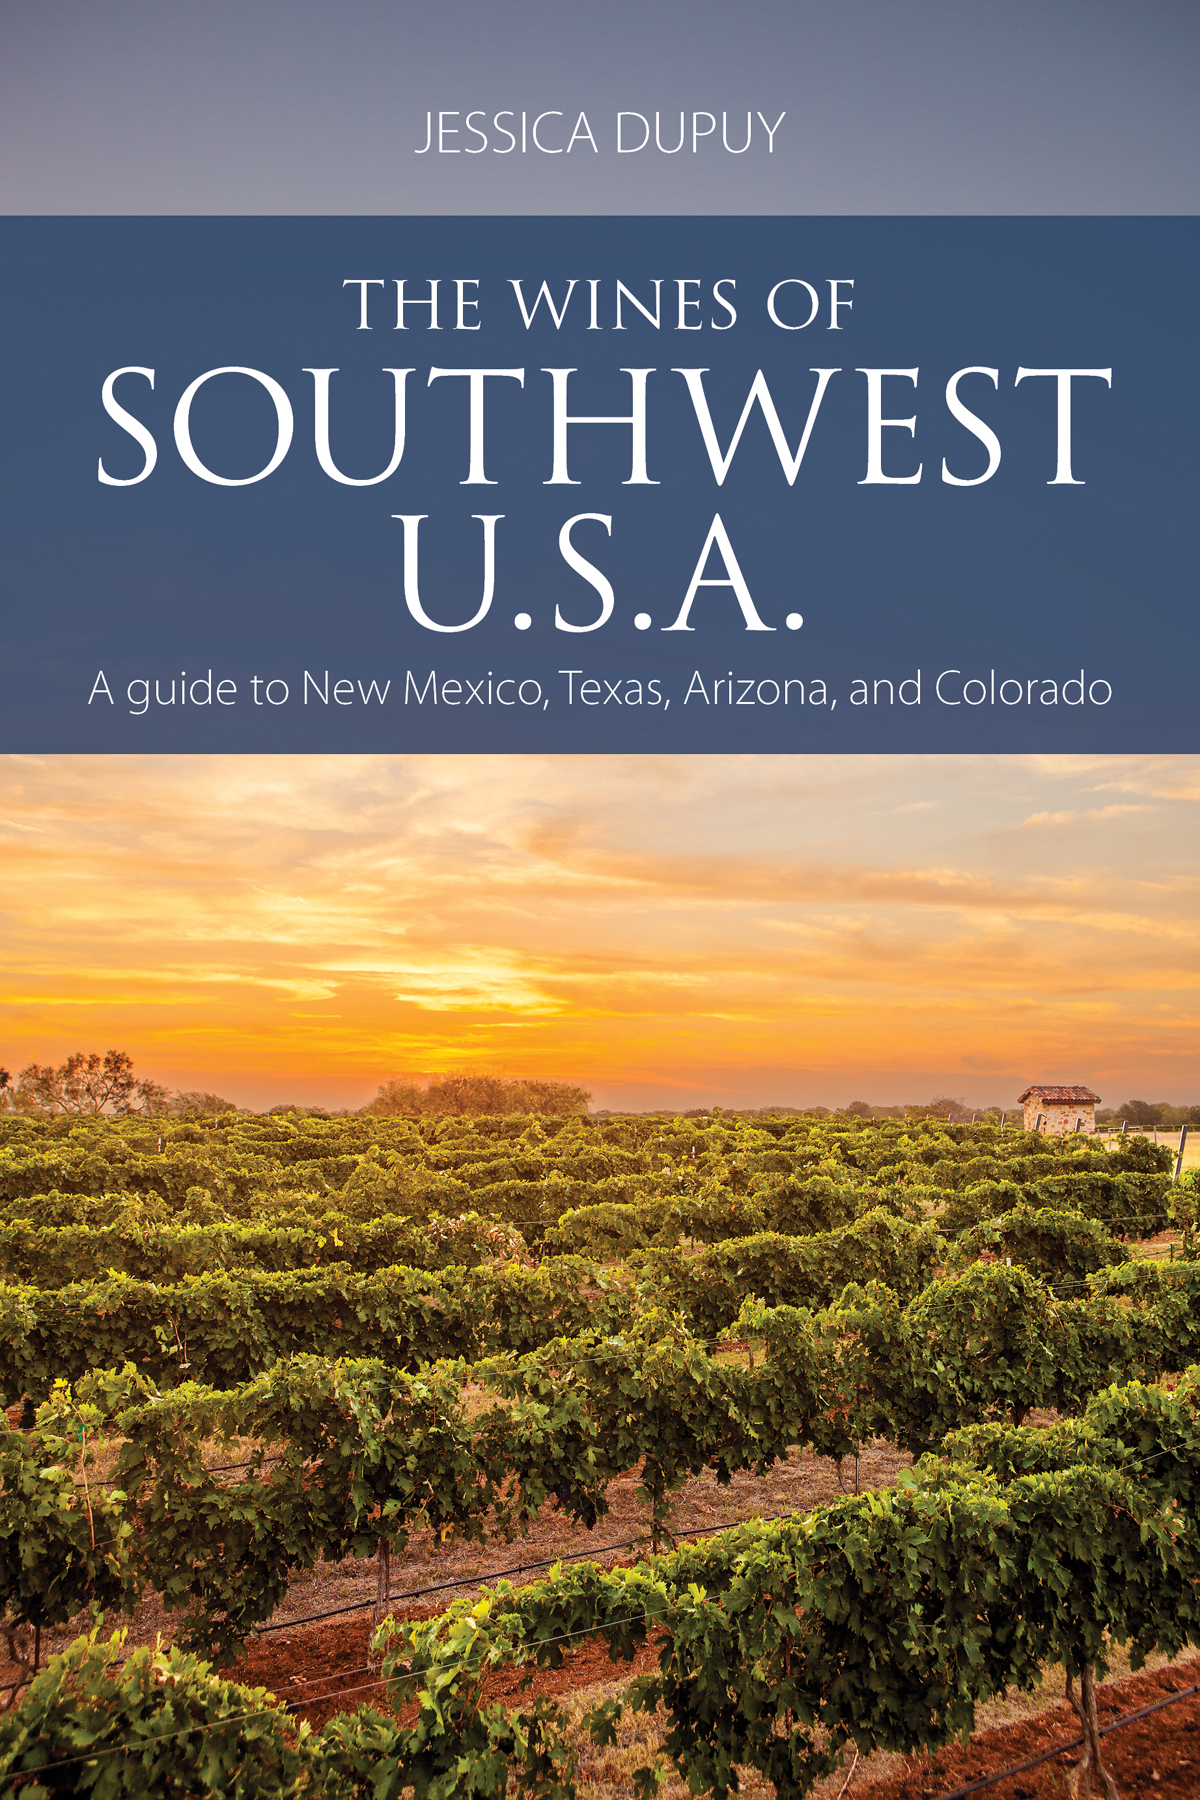 The wines of Southwest U.S.A.